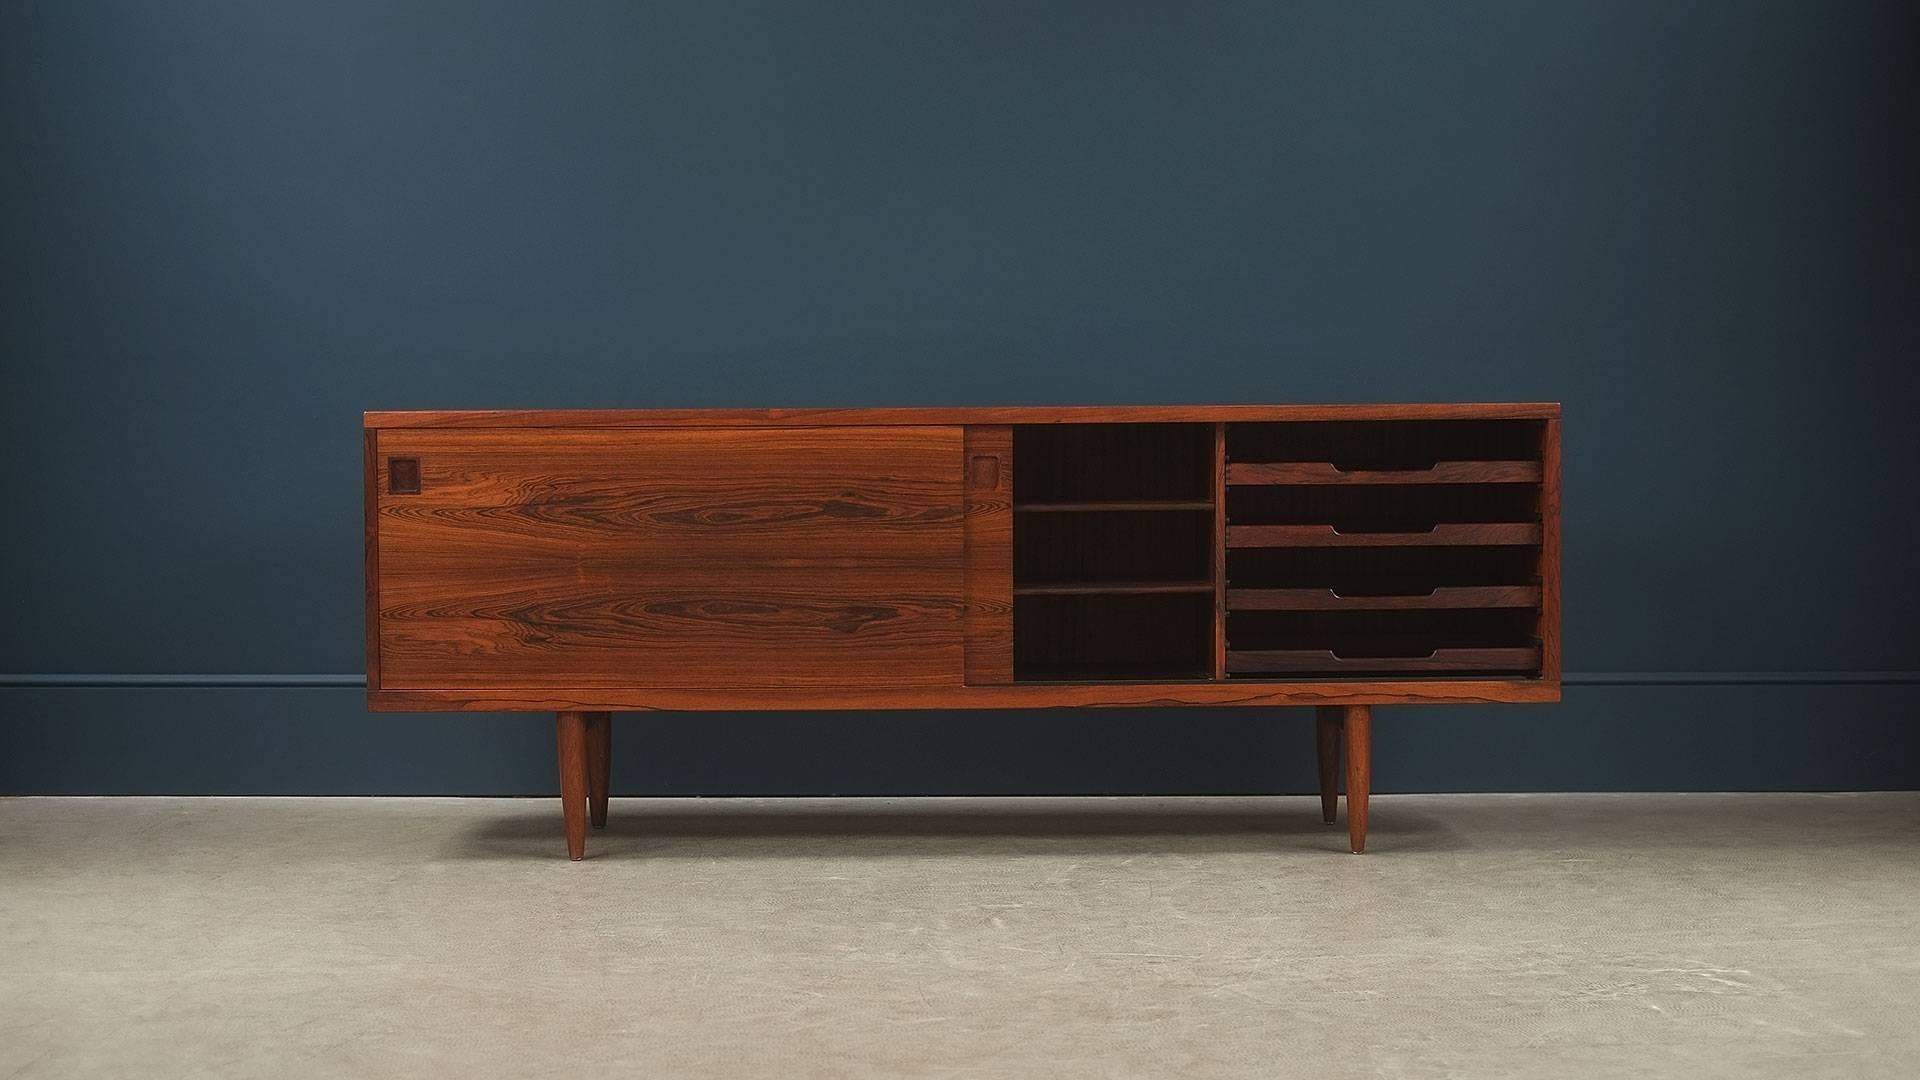 Super sought after and rare sideboard in wonderful rosewood with a staggering grain designed by Niels Moller, Denmark. Elegant proportions, simple detailing and ultra high quality piece.
 